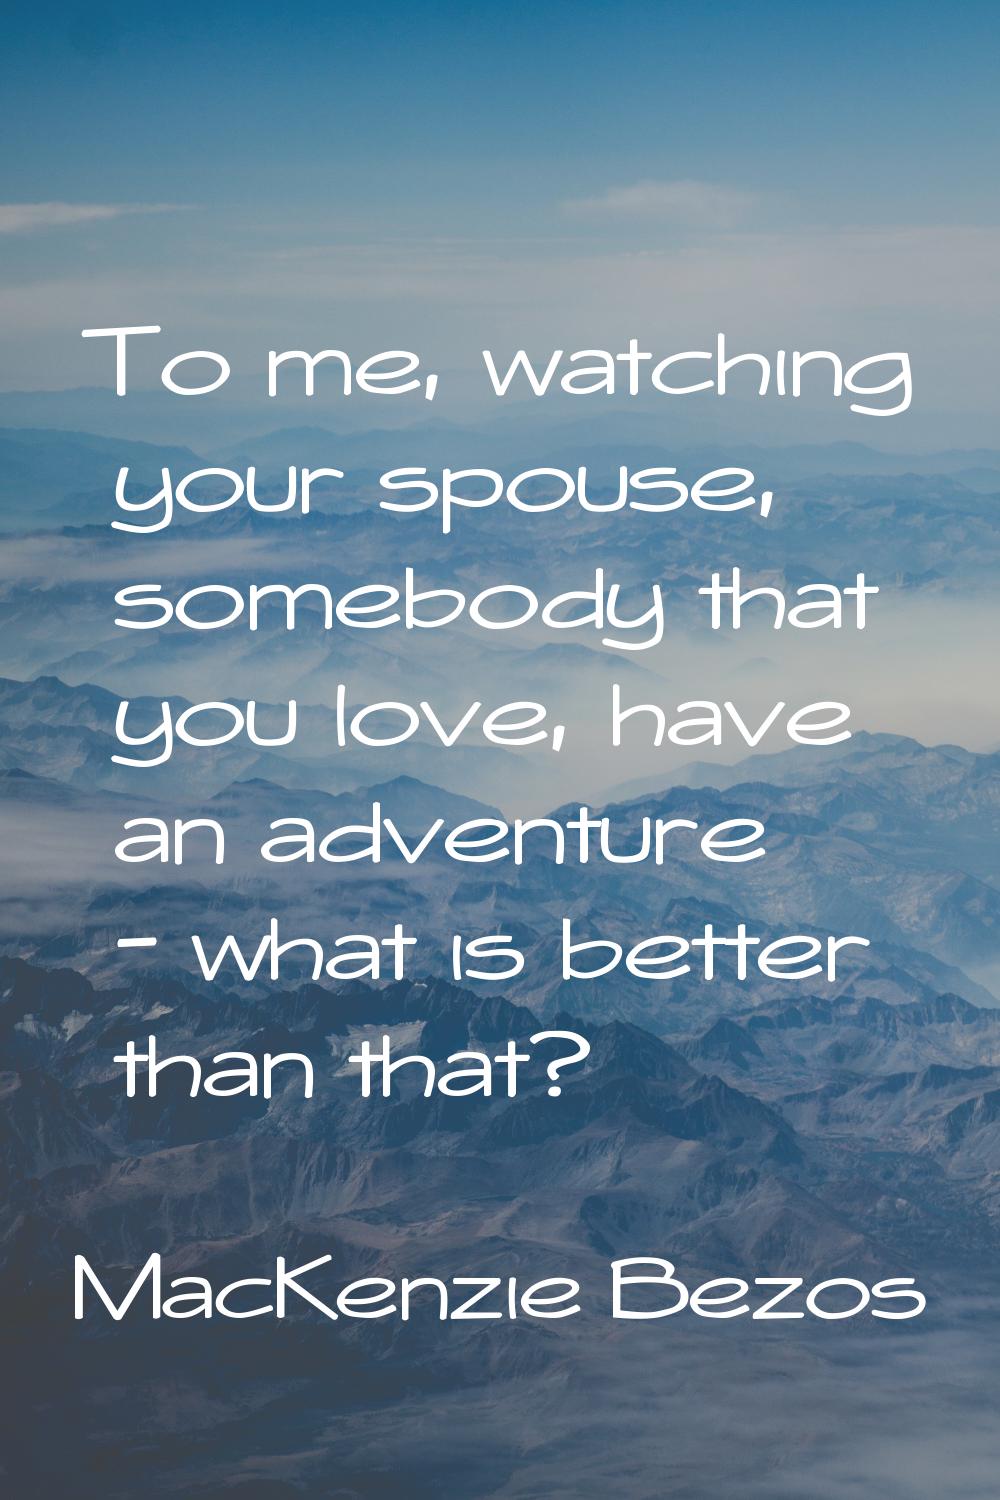 To me, watching your spouse, somebody that you love, have an adventure - what is better than that?